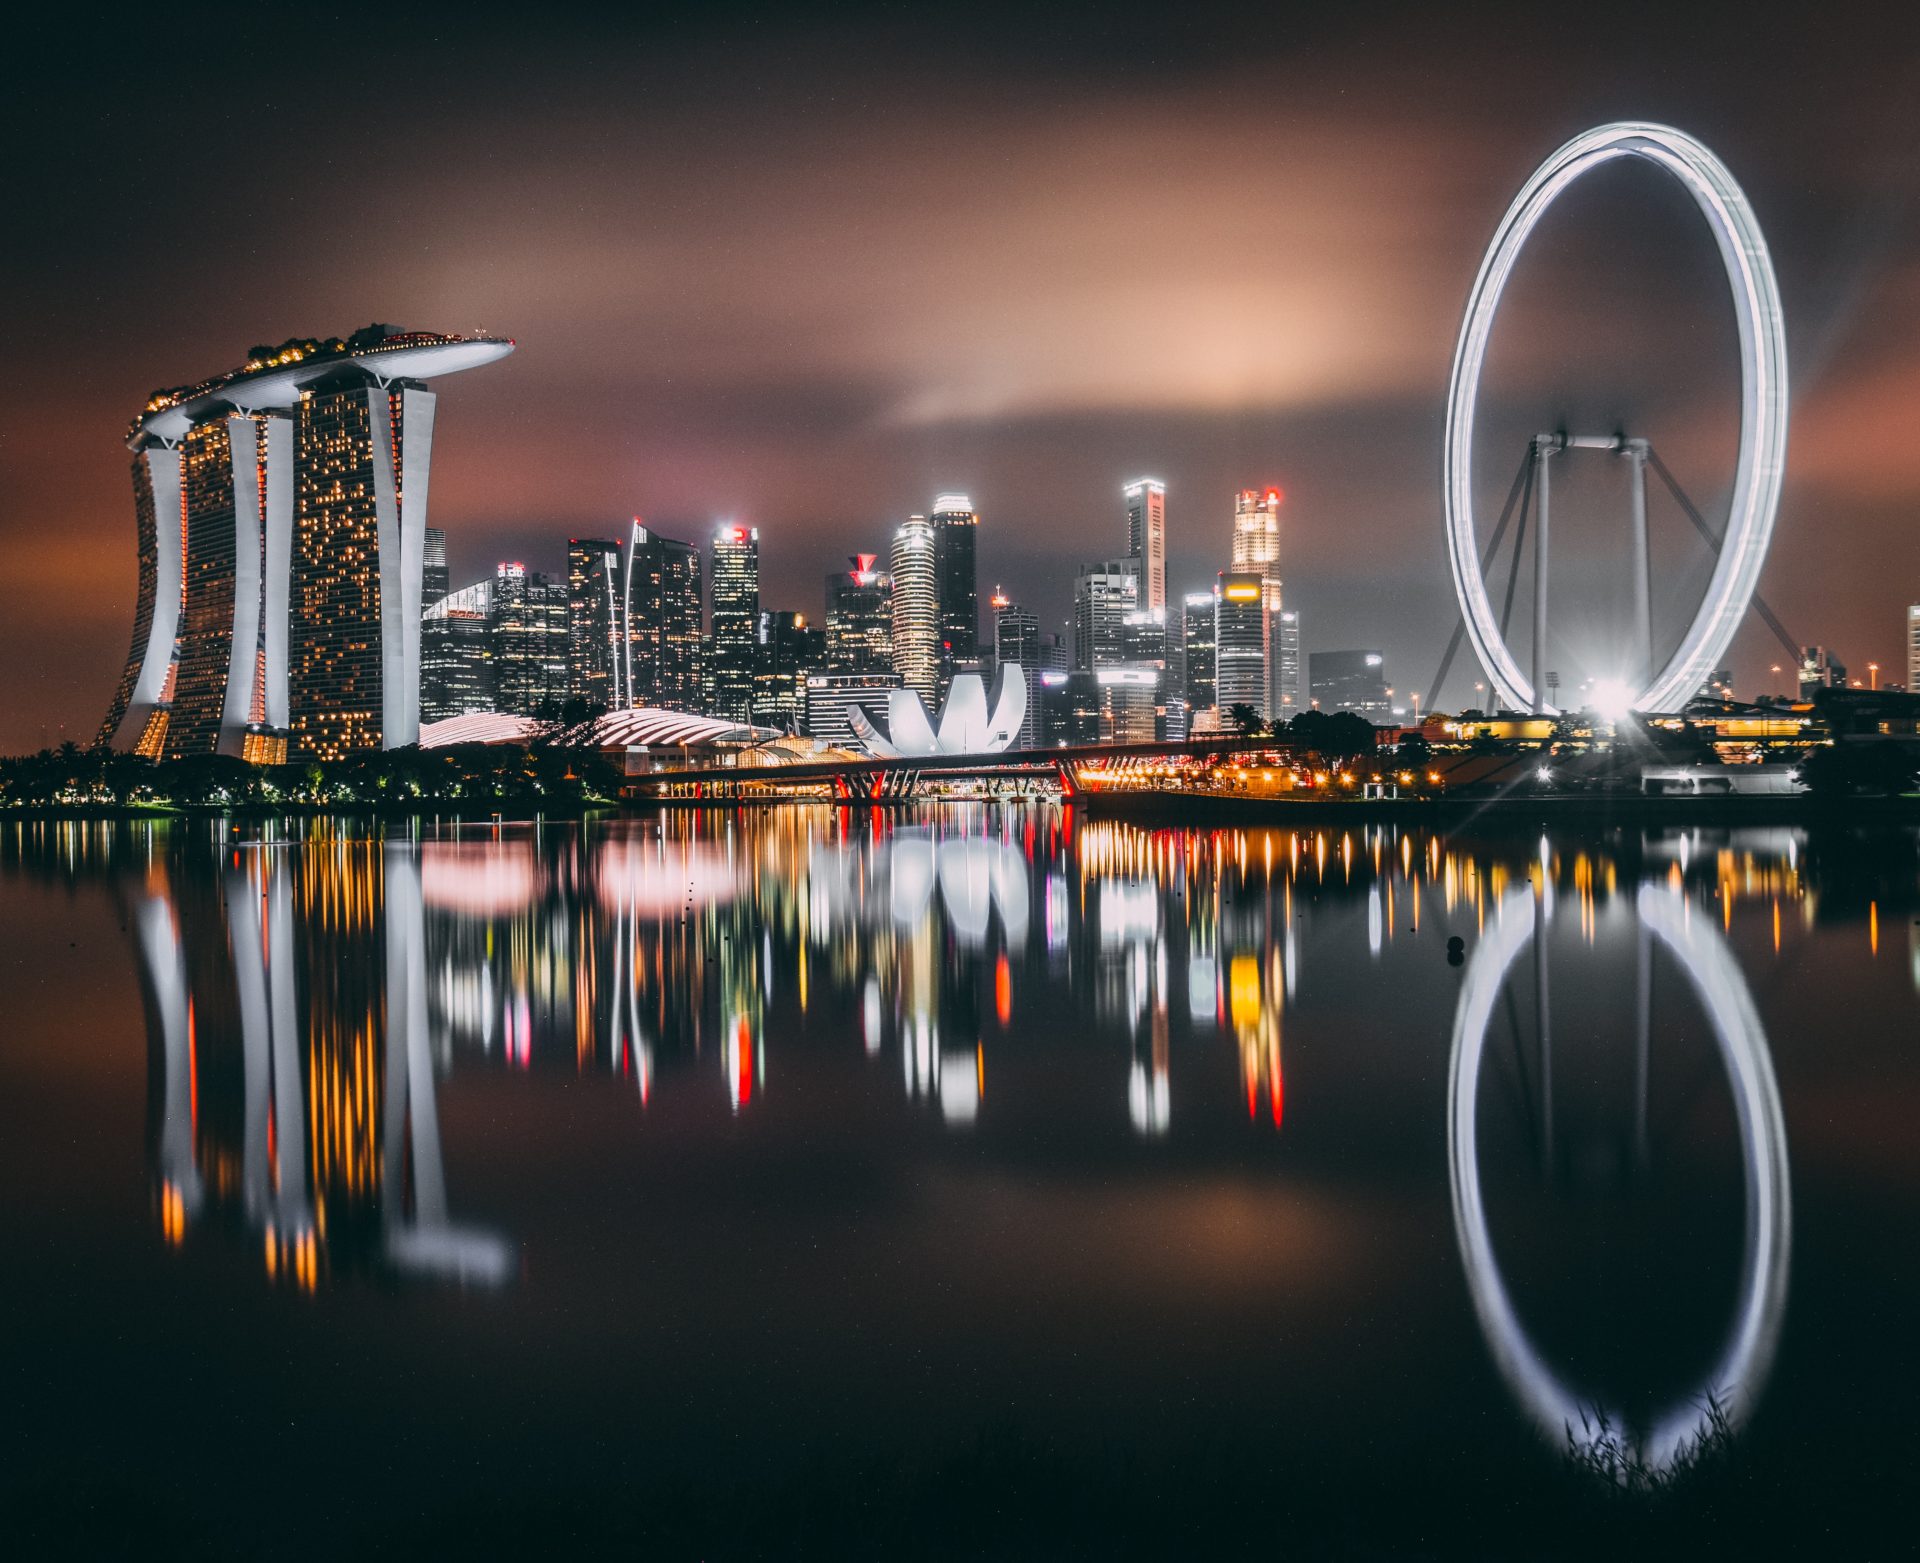 Singapore-Based Venture Capital Firm To Open The $10 Million LuneX Crypto Fund